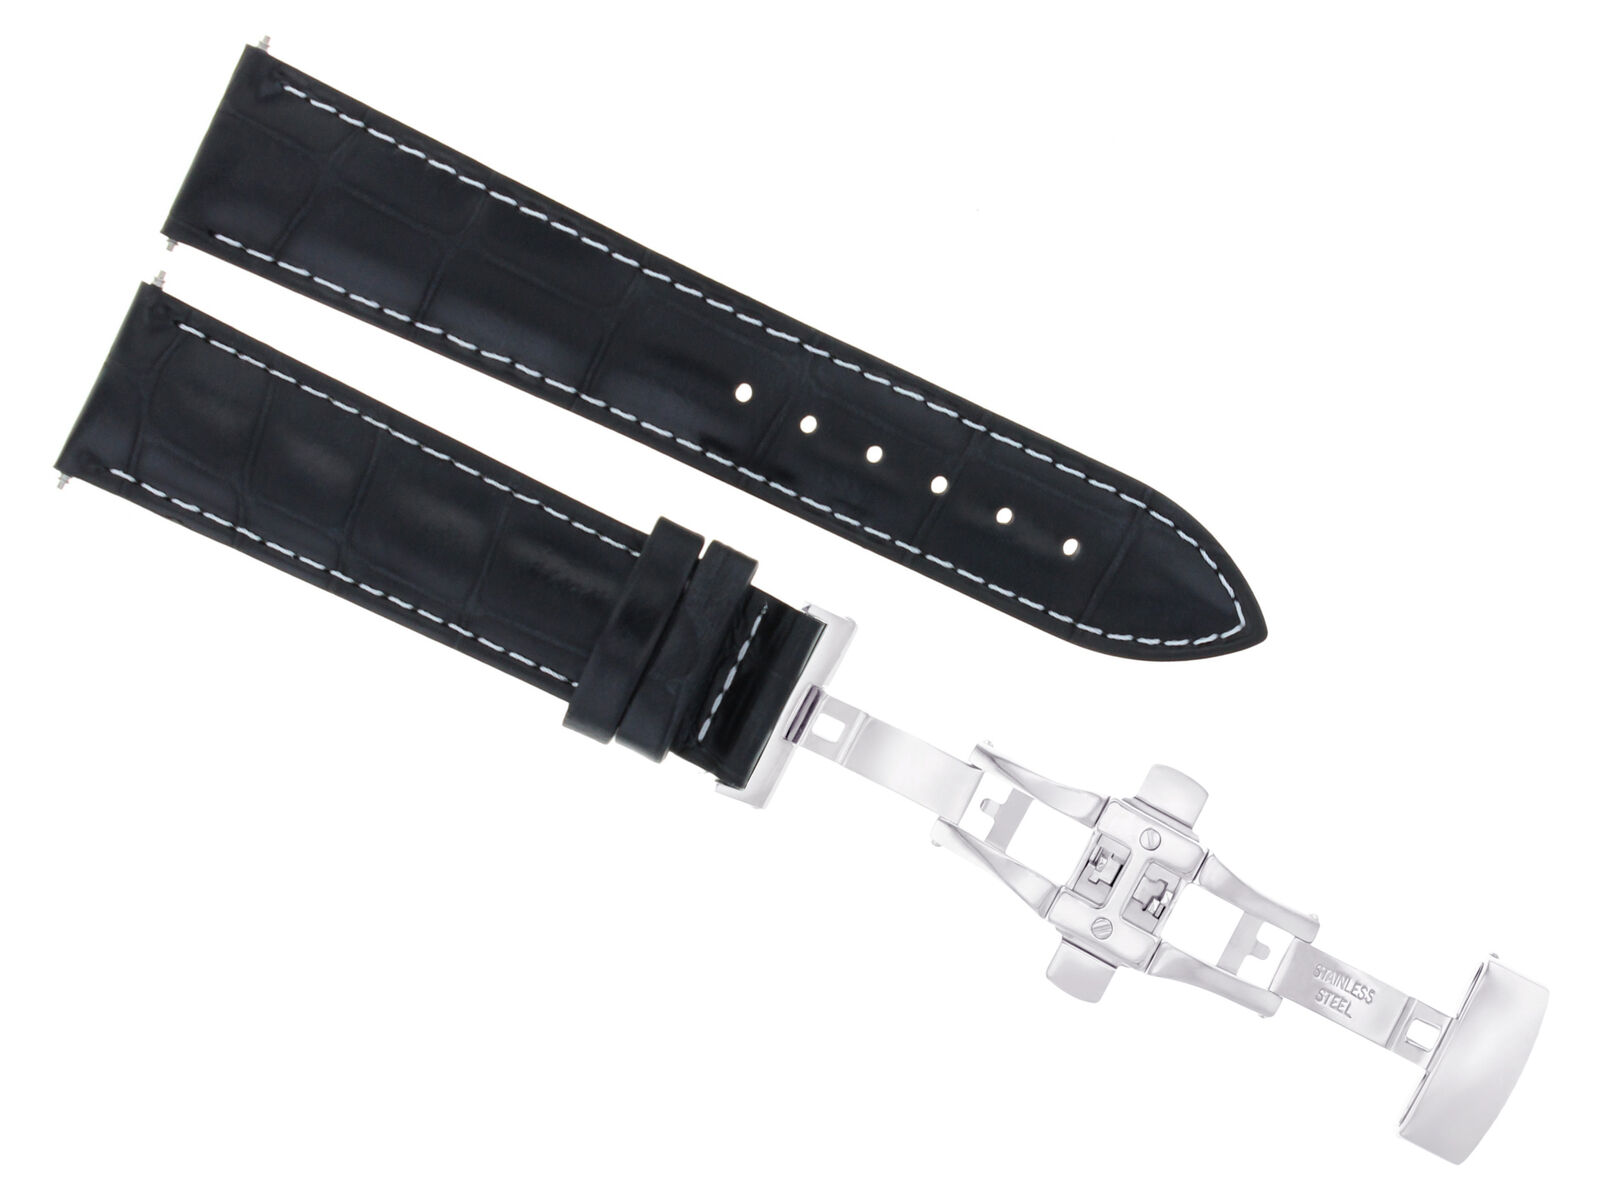 18MM LEATHER WATCH BAND STRAP DEPLOYMENT CLASP BUCKLE FOR BREGUET WATCH BLACK WS